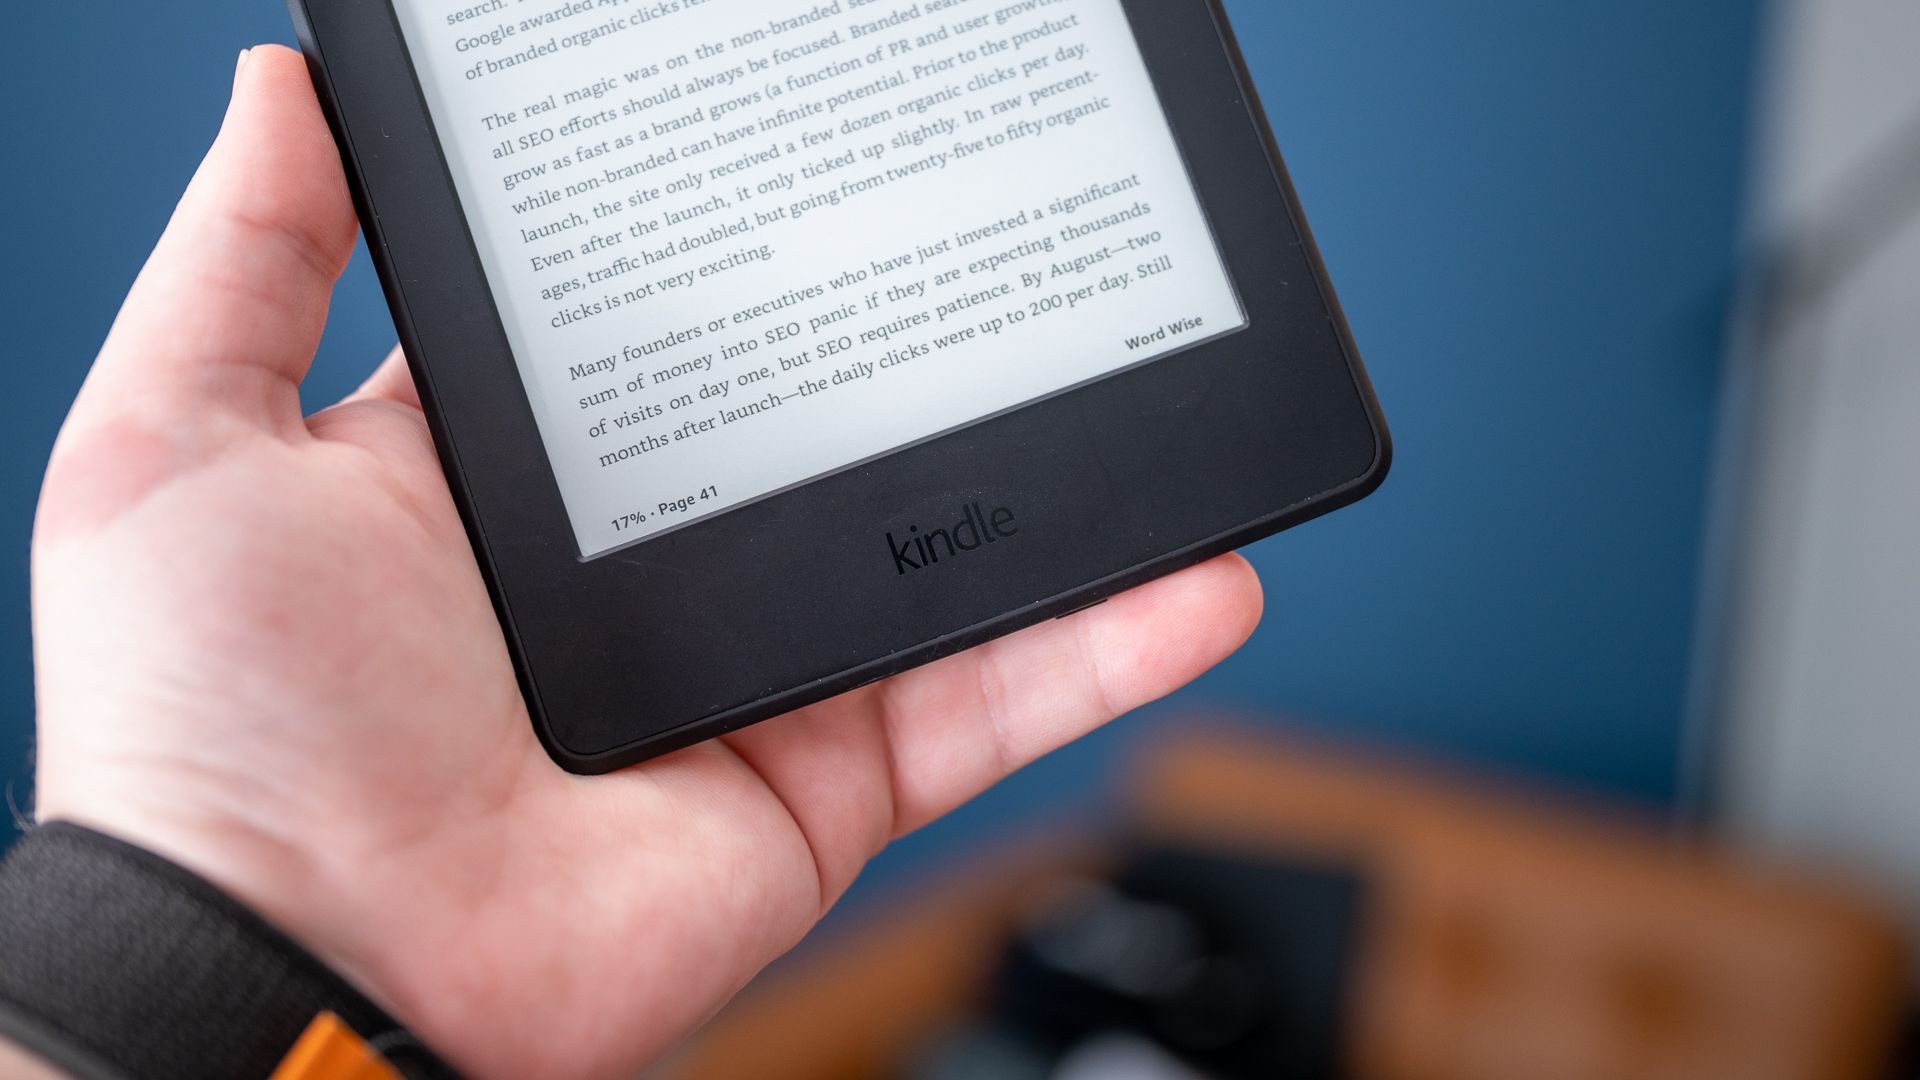 Kindle logo and page number displayed on the 2015 Amazon Kindle Paperwhite eReader